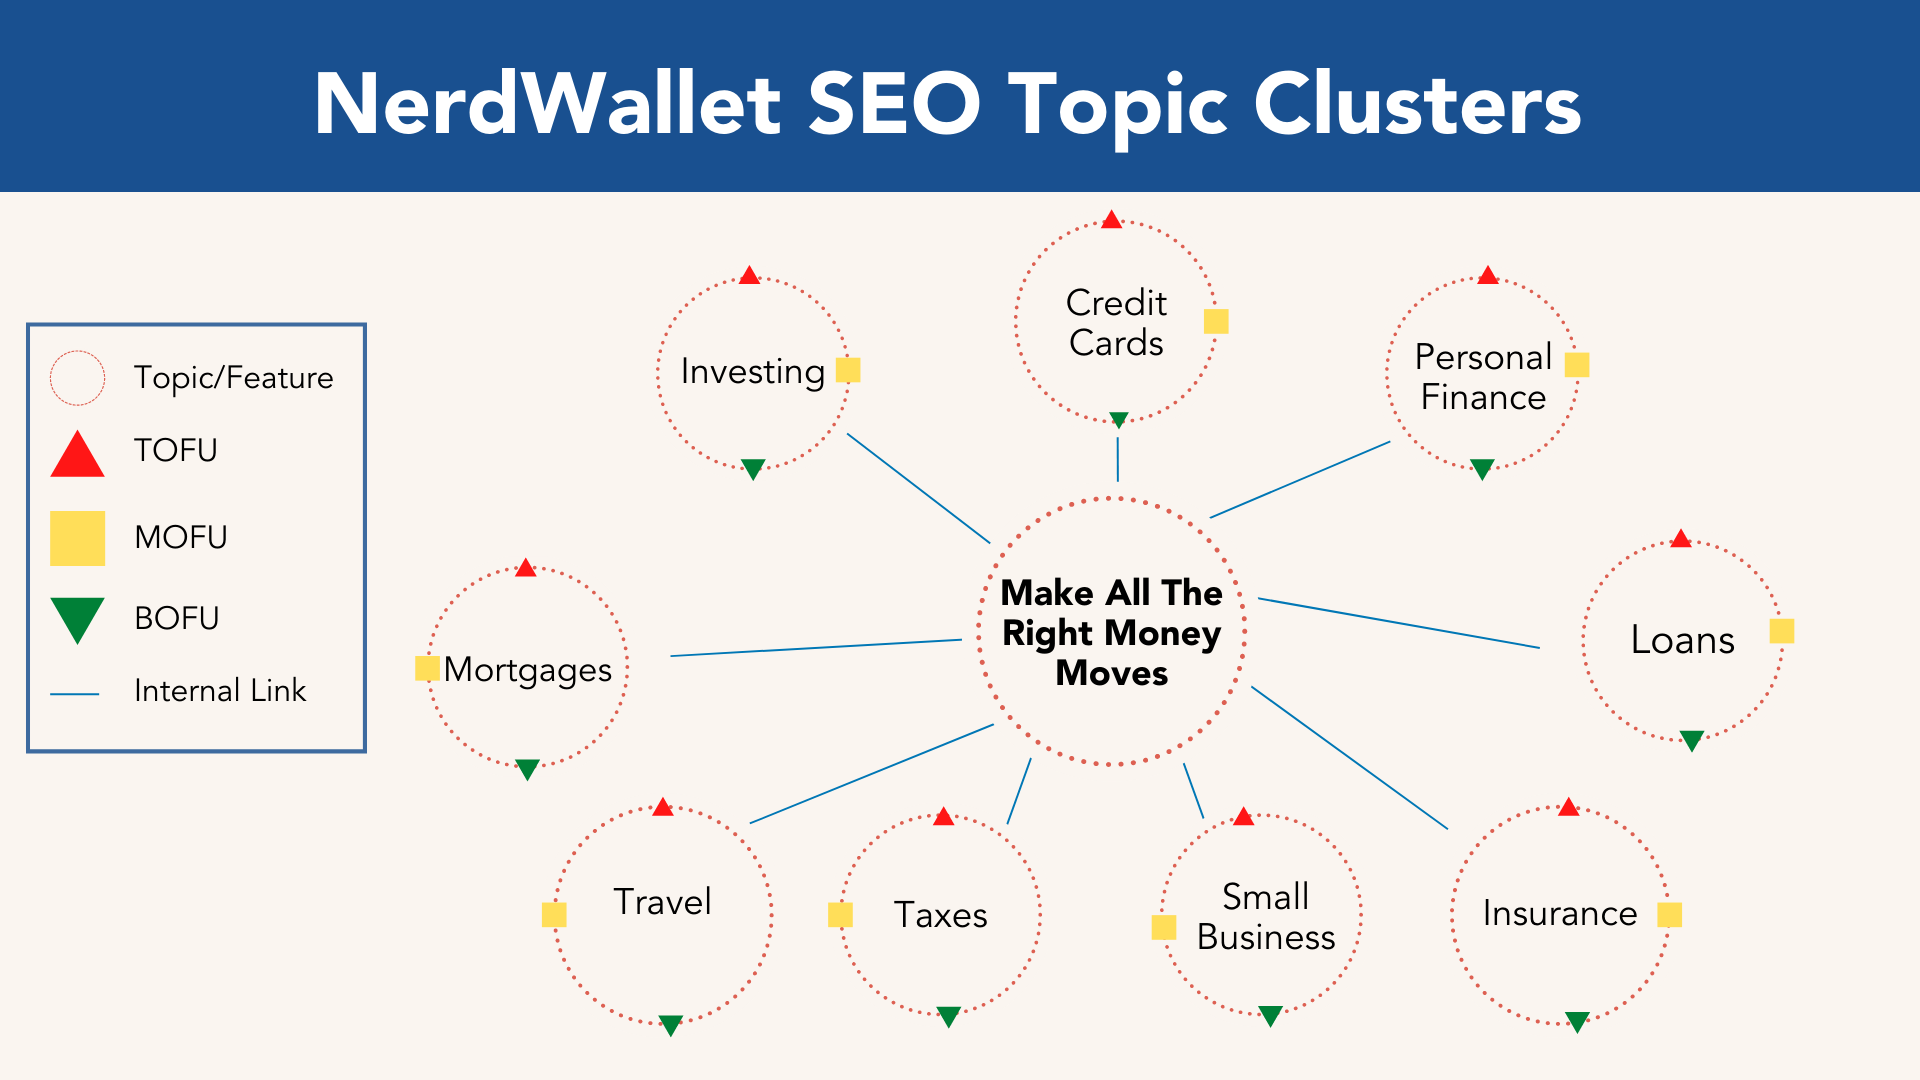 SEO Topic Clusters: An informative visual representation of topic clusters in the context of NerdWallet's SEO strategy. The diagram illustrates the interconnectedness of different topics and their subtopics, showcasing how content is organized to improve search engine optimization and enhance user experience on the NerdWallet website.